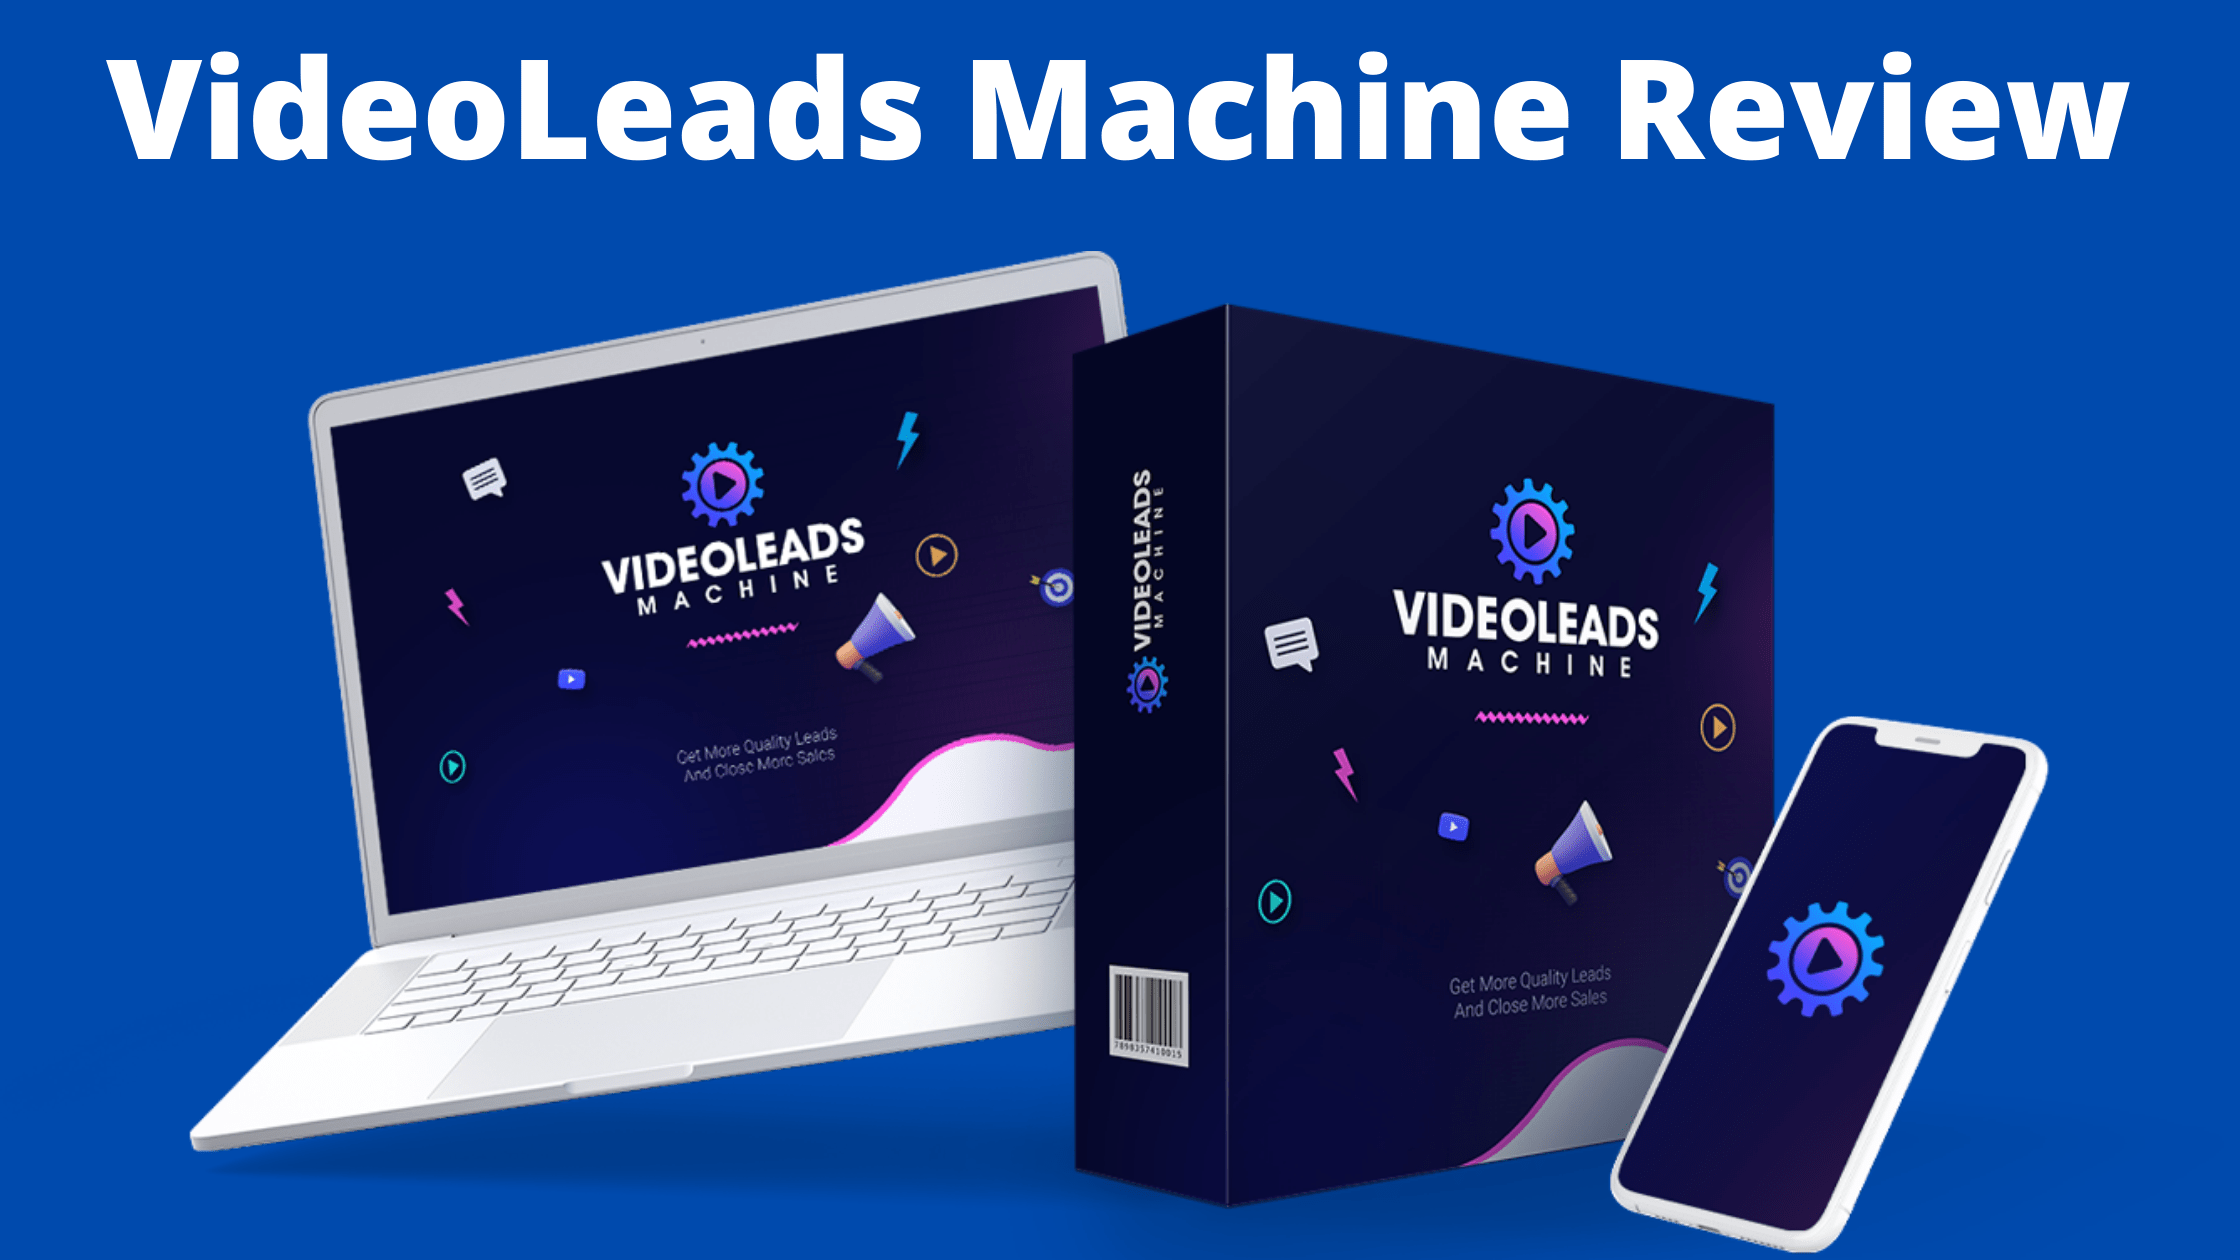 VideoLeads Machine Review